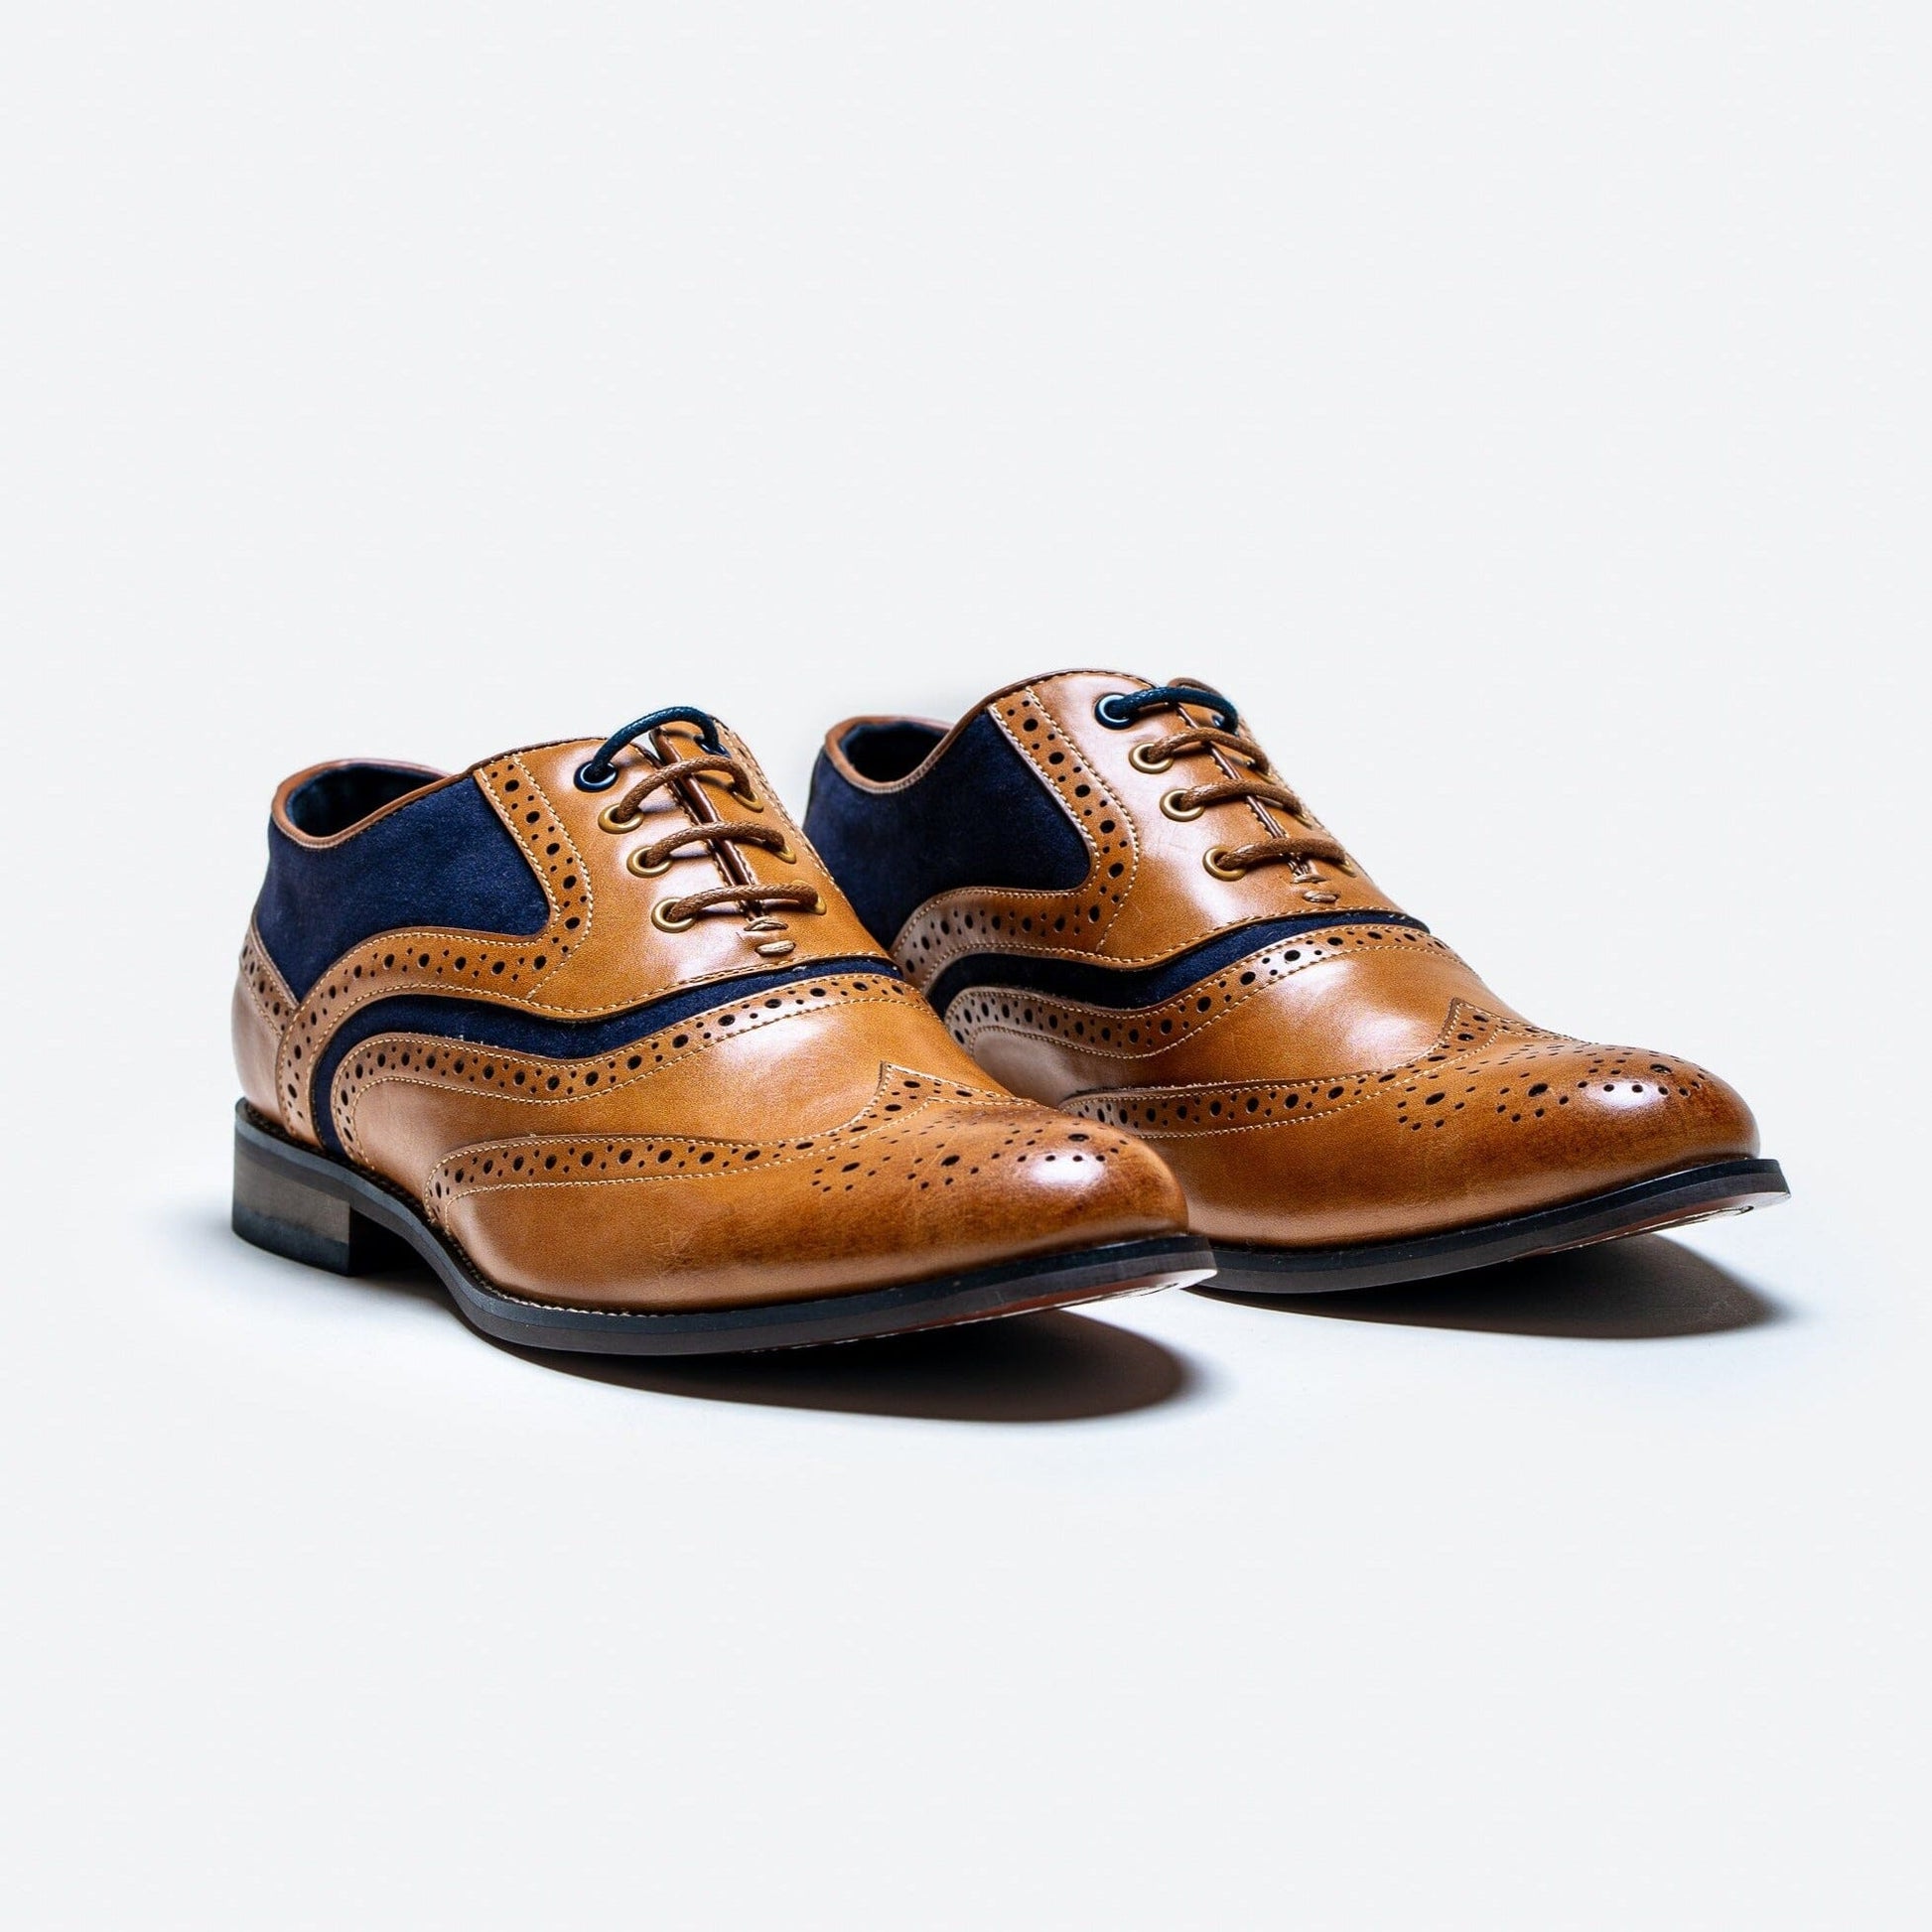 Russel Tan & Navy Brogue Shoes - OOS 3/8/23 - Shoes - - THREADPEPPER